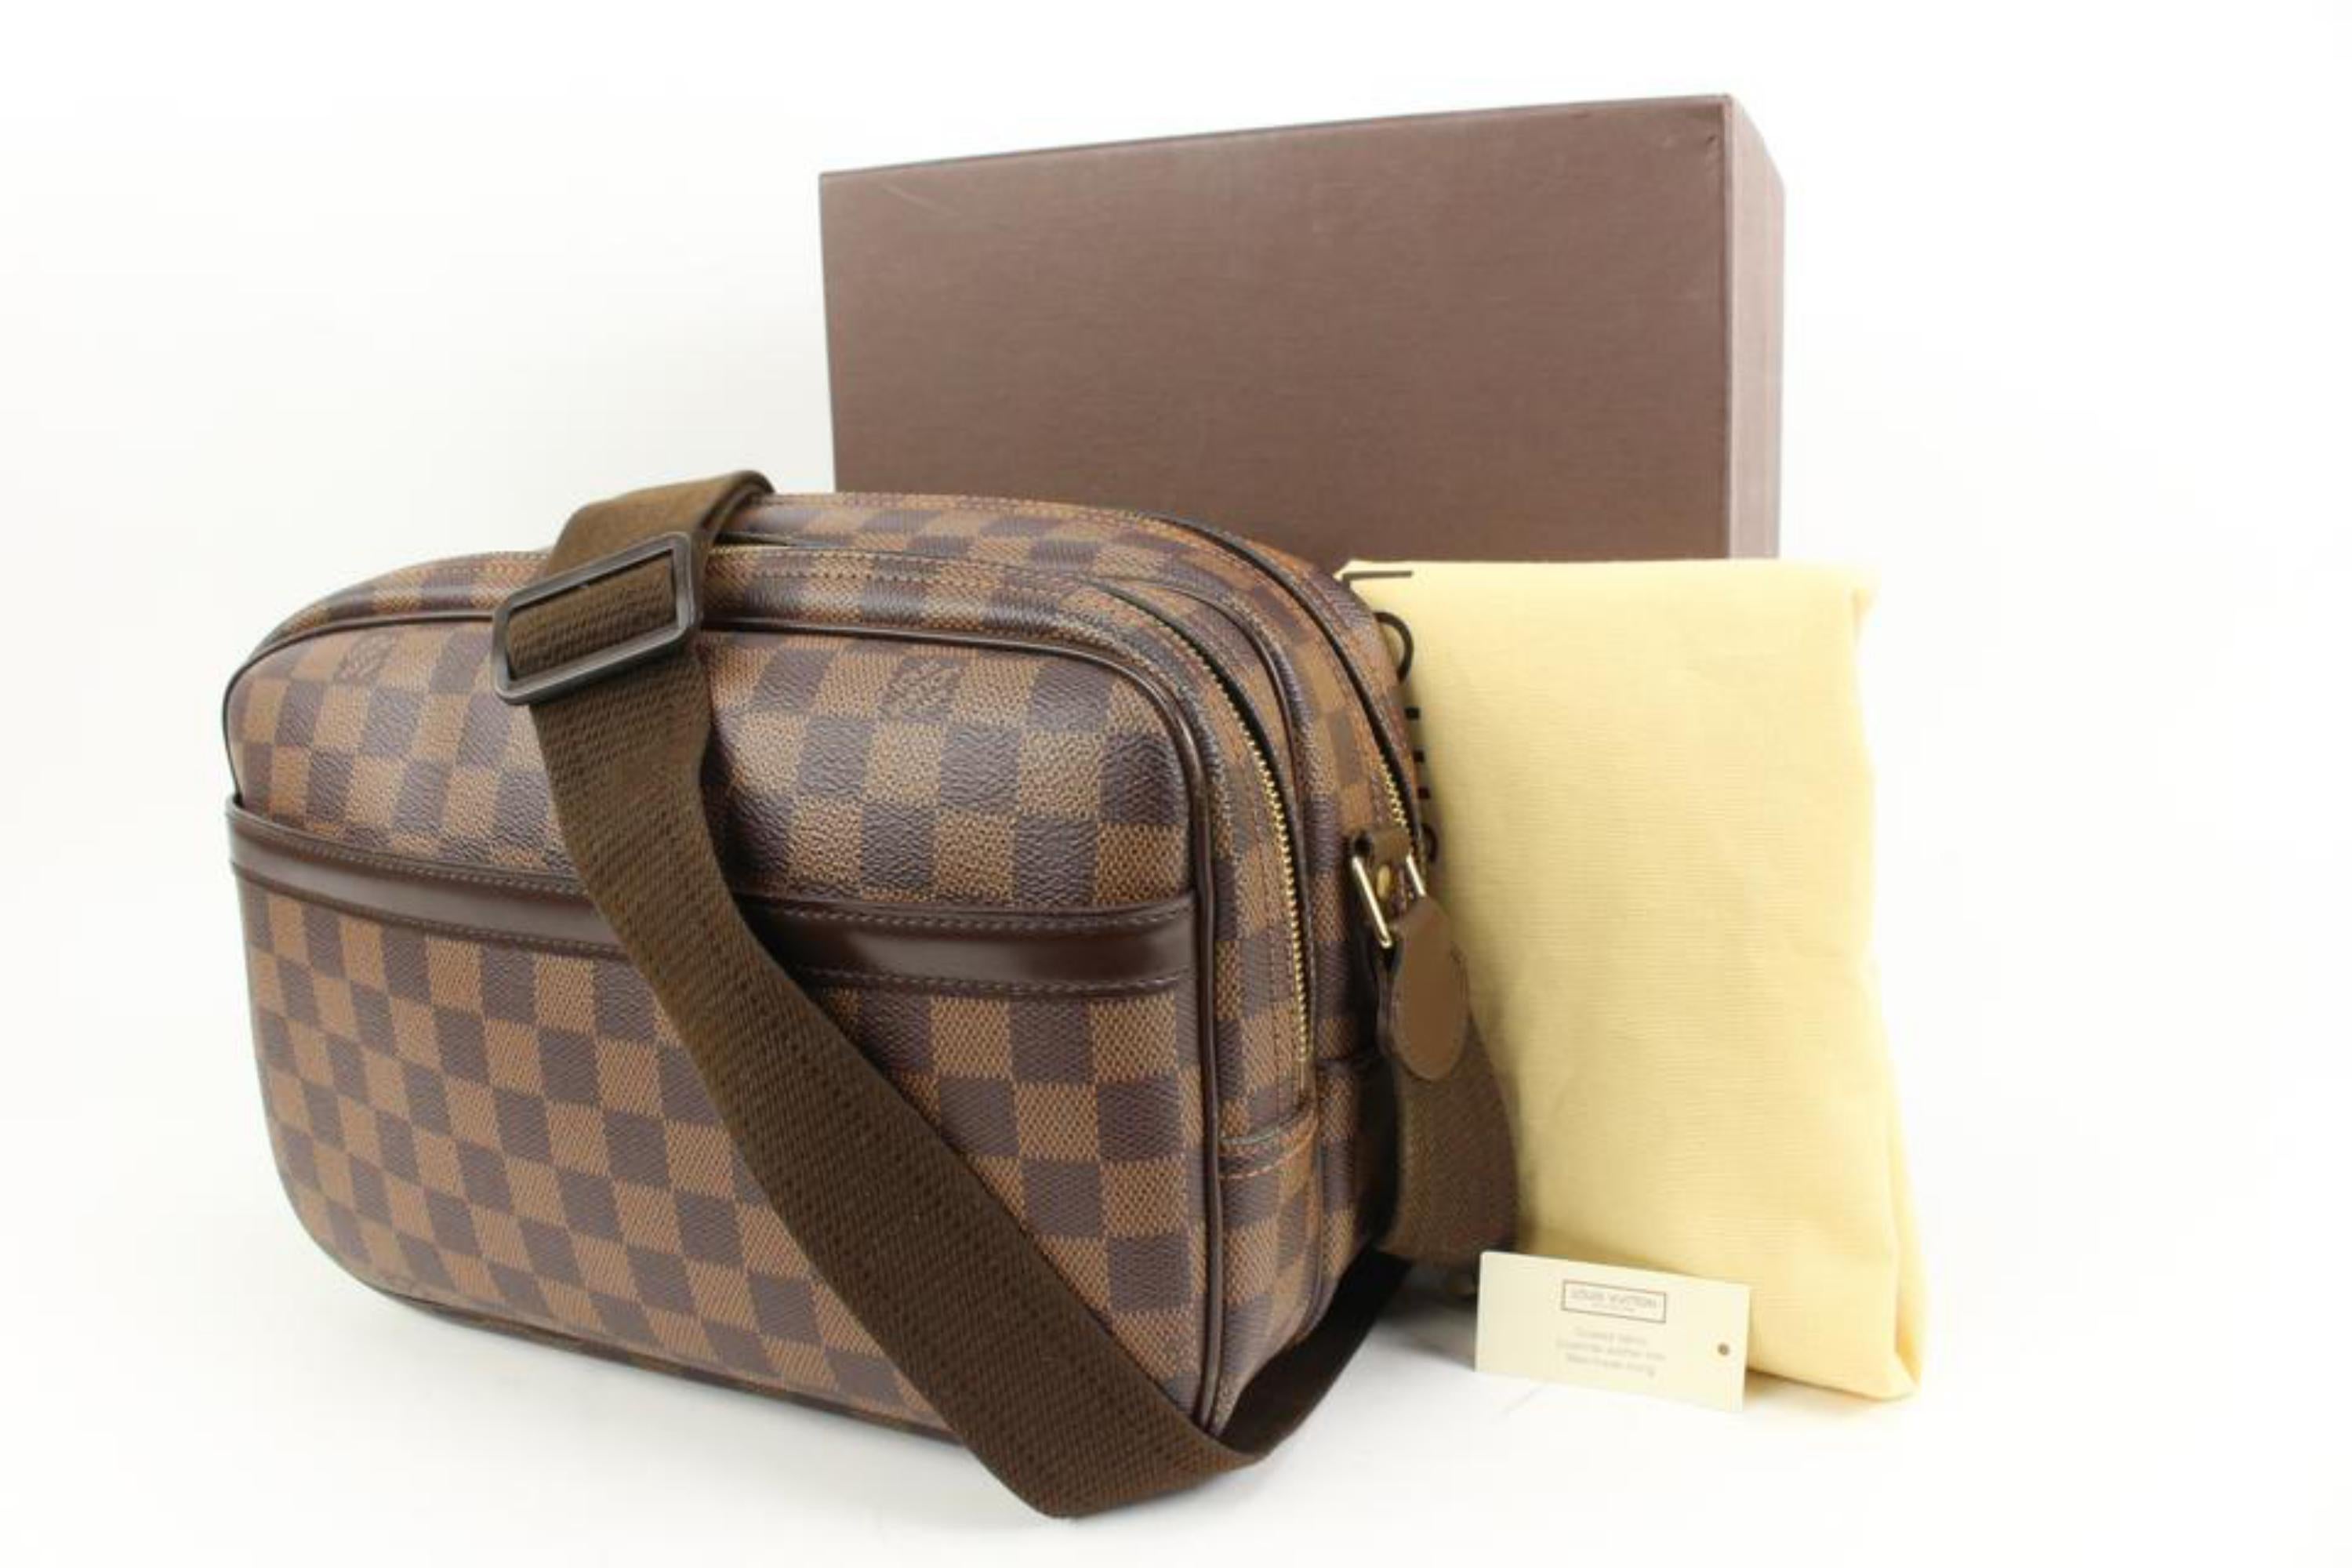 Louis Vuitton Special Order Damier Ebene Reporter PM Crossbody Messenger 81lv317s
Date Code/Serial Number: SP0056
Made In: France
Measurements: Length:  11.5